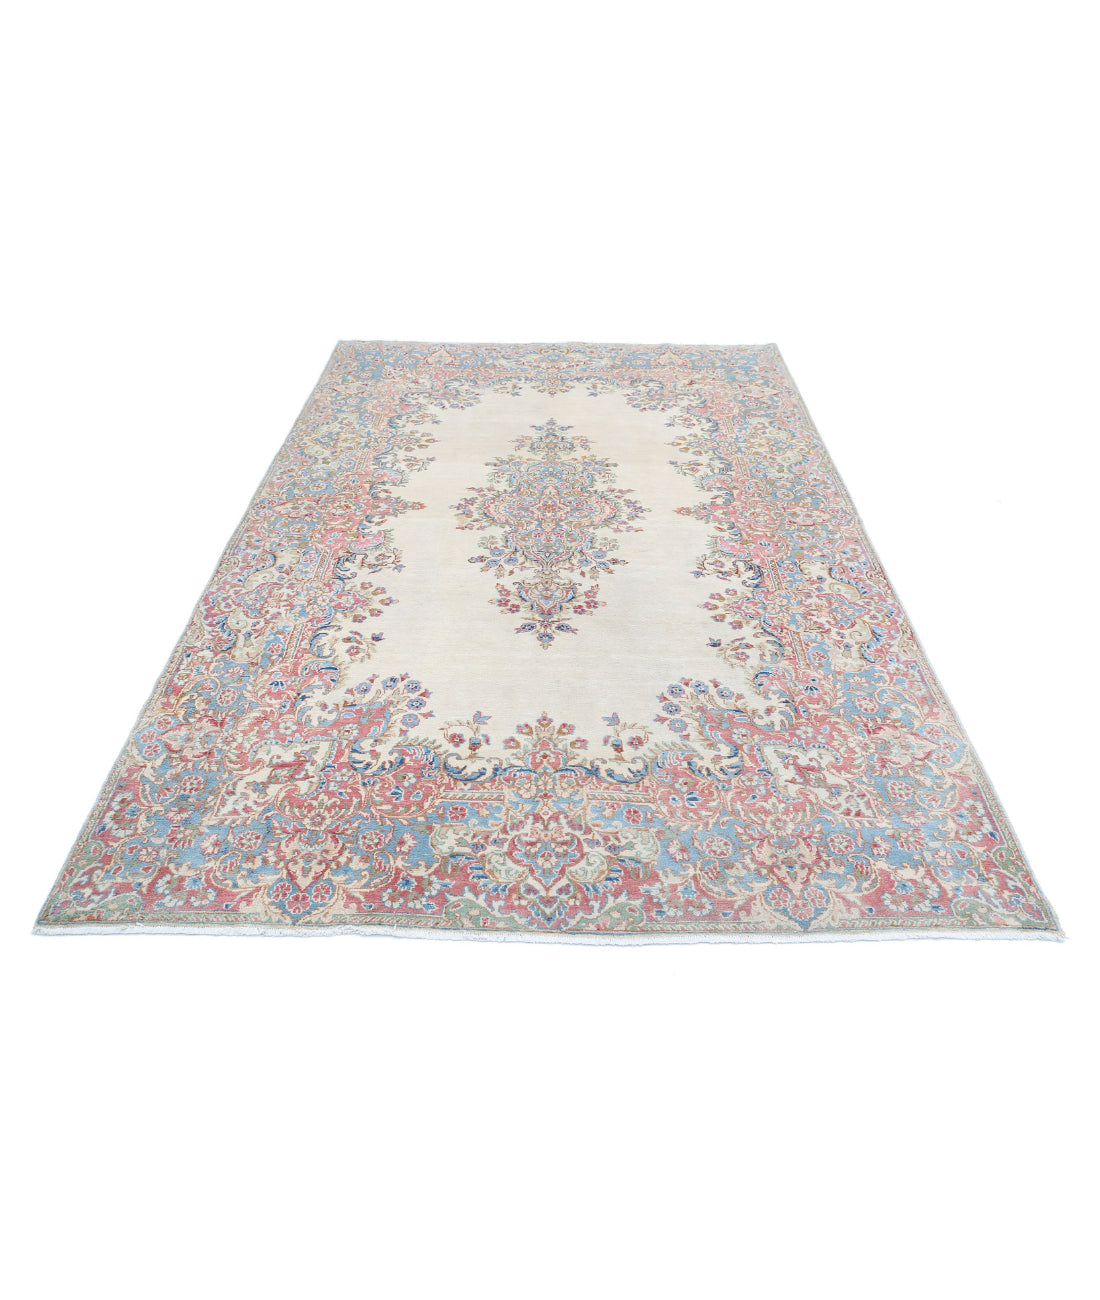 Hand Knotted Persian Kerman Wool Rug - 5'10'' x 8'11'' 5'10'' x 8'11'' (175 X 268) / Ivory / Blue